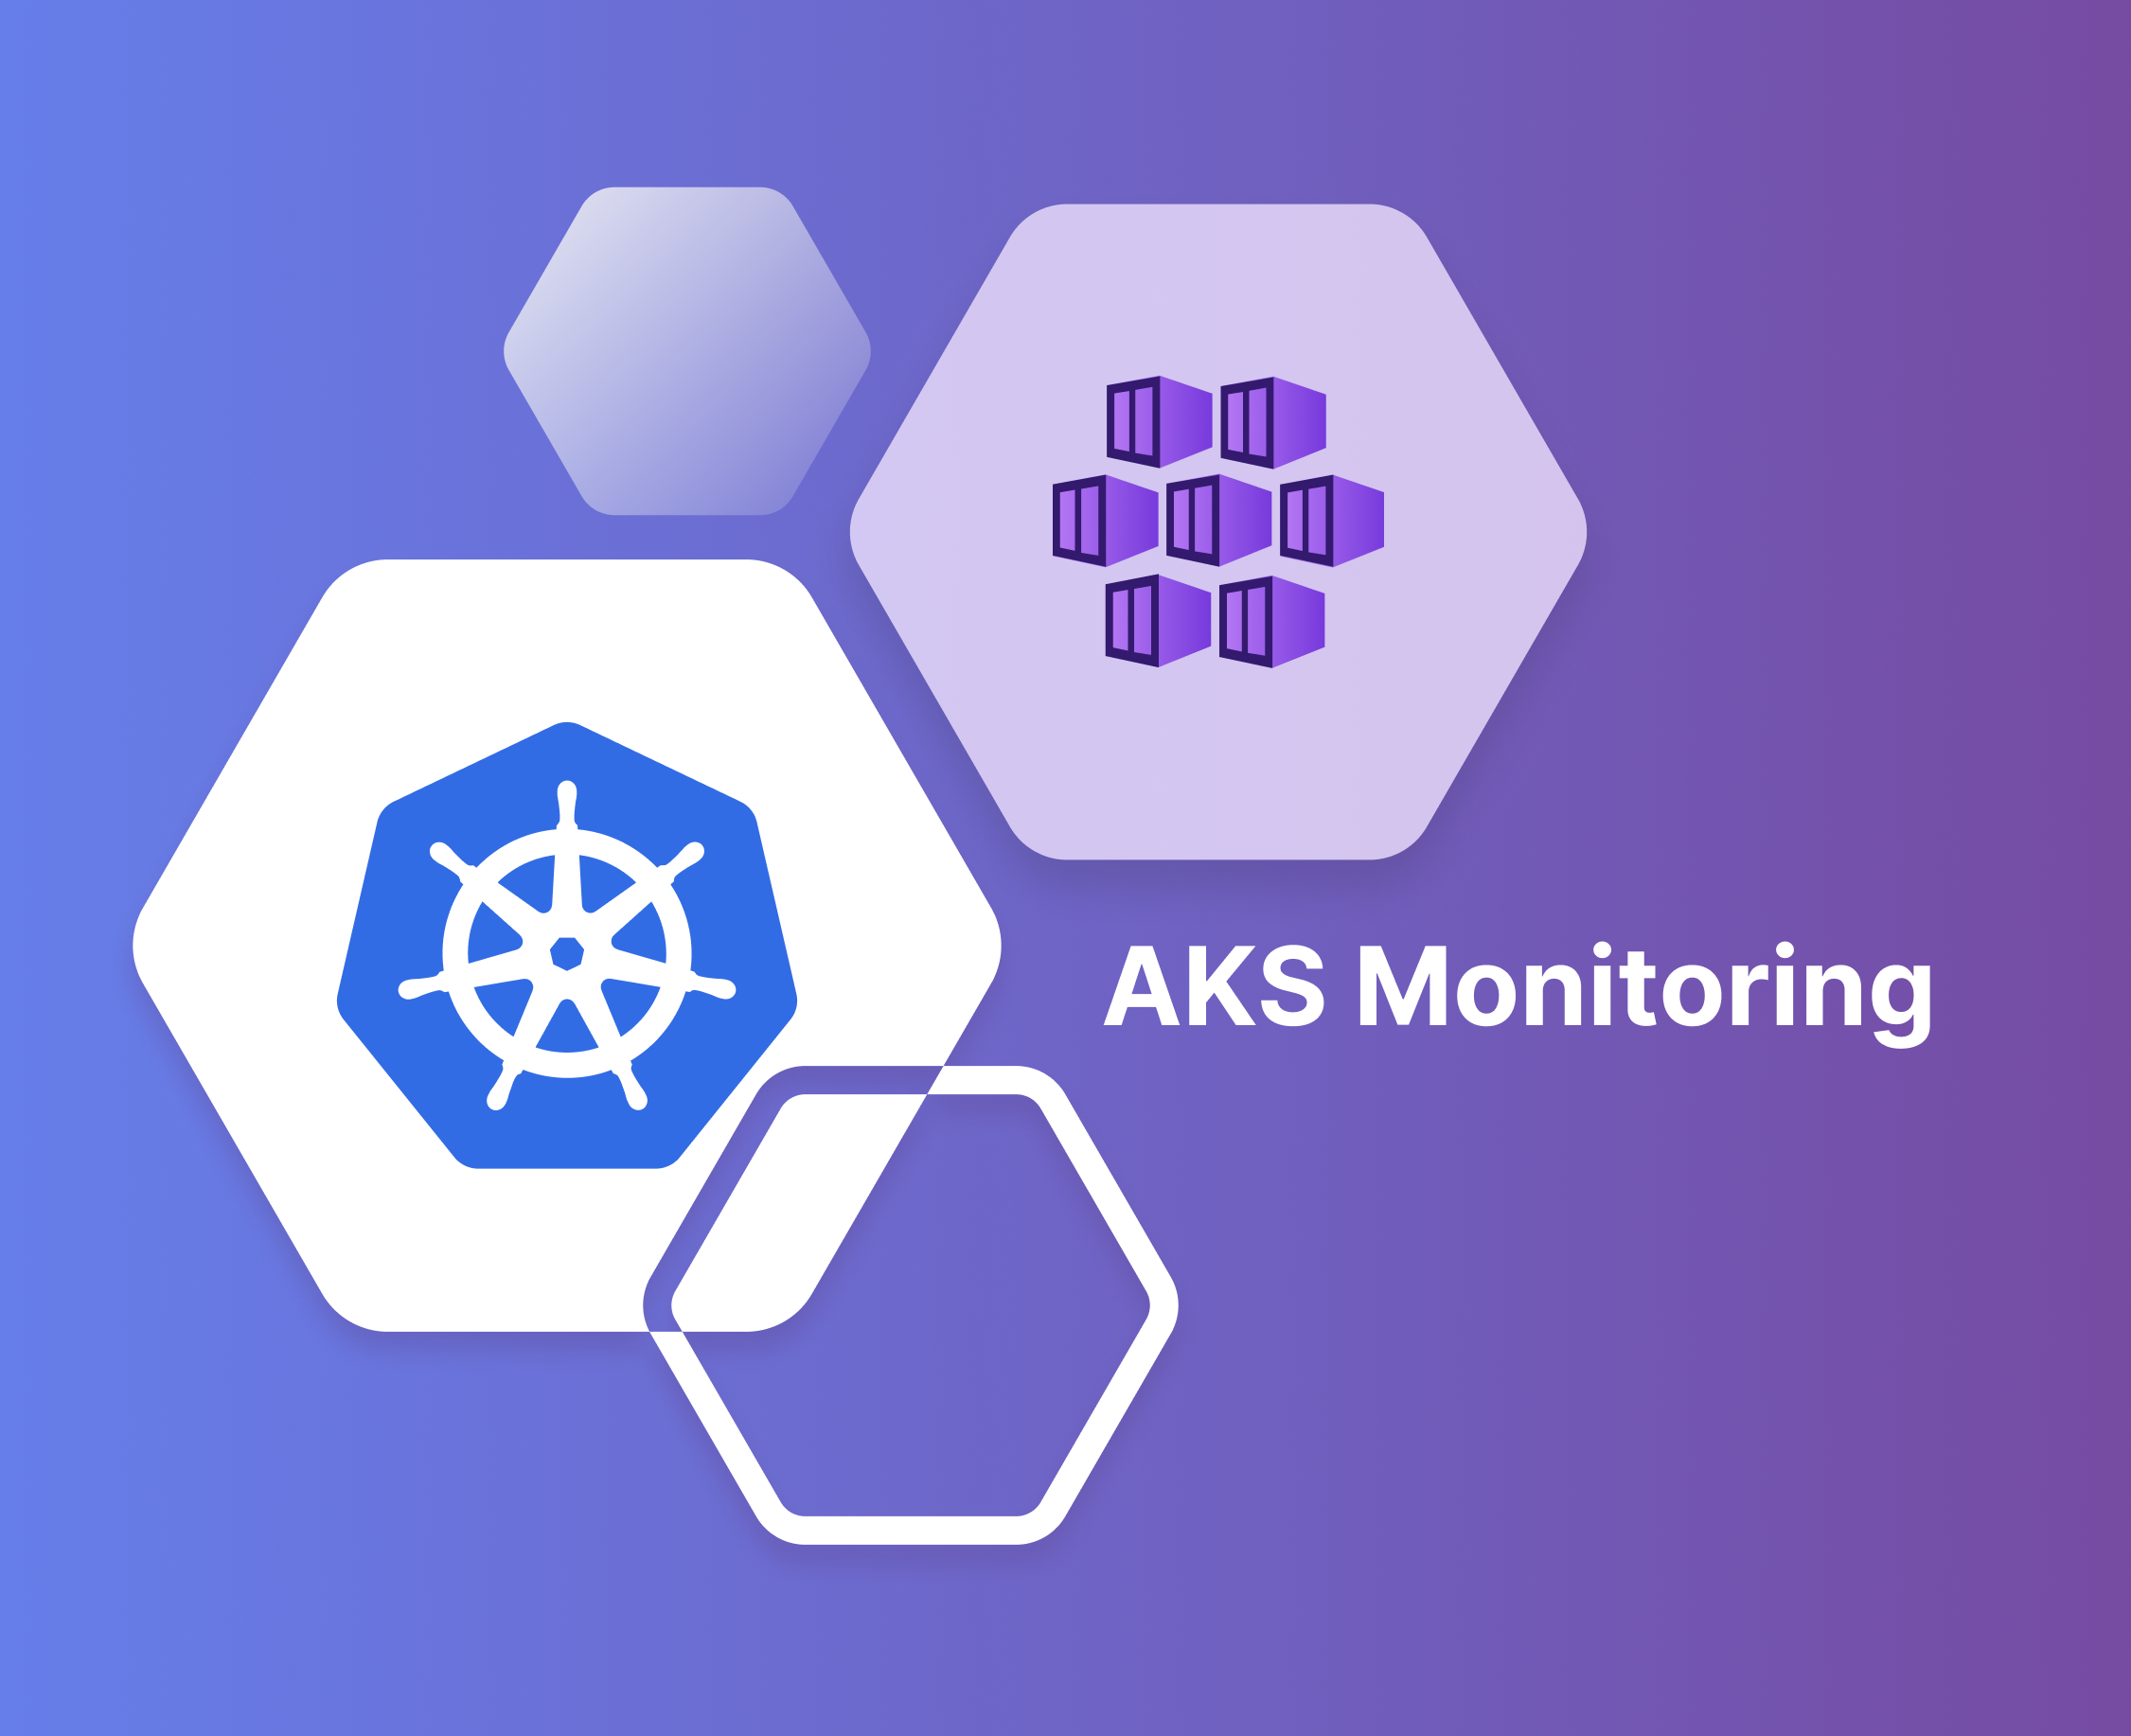 AKS monitoring best practices & tools